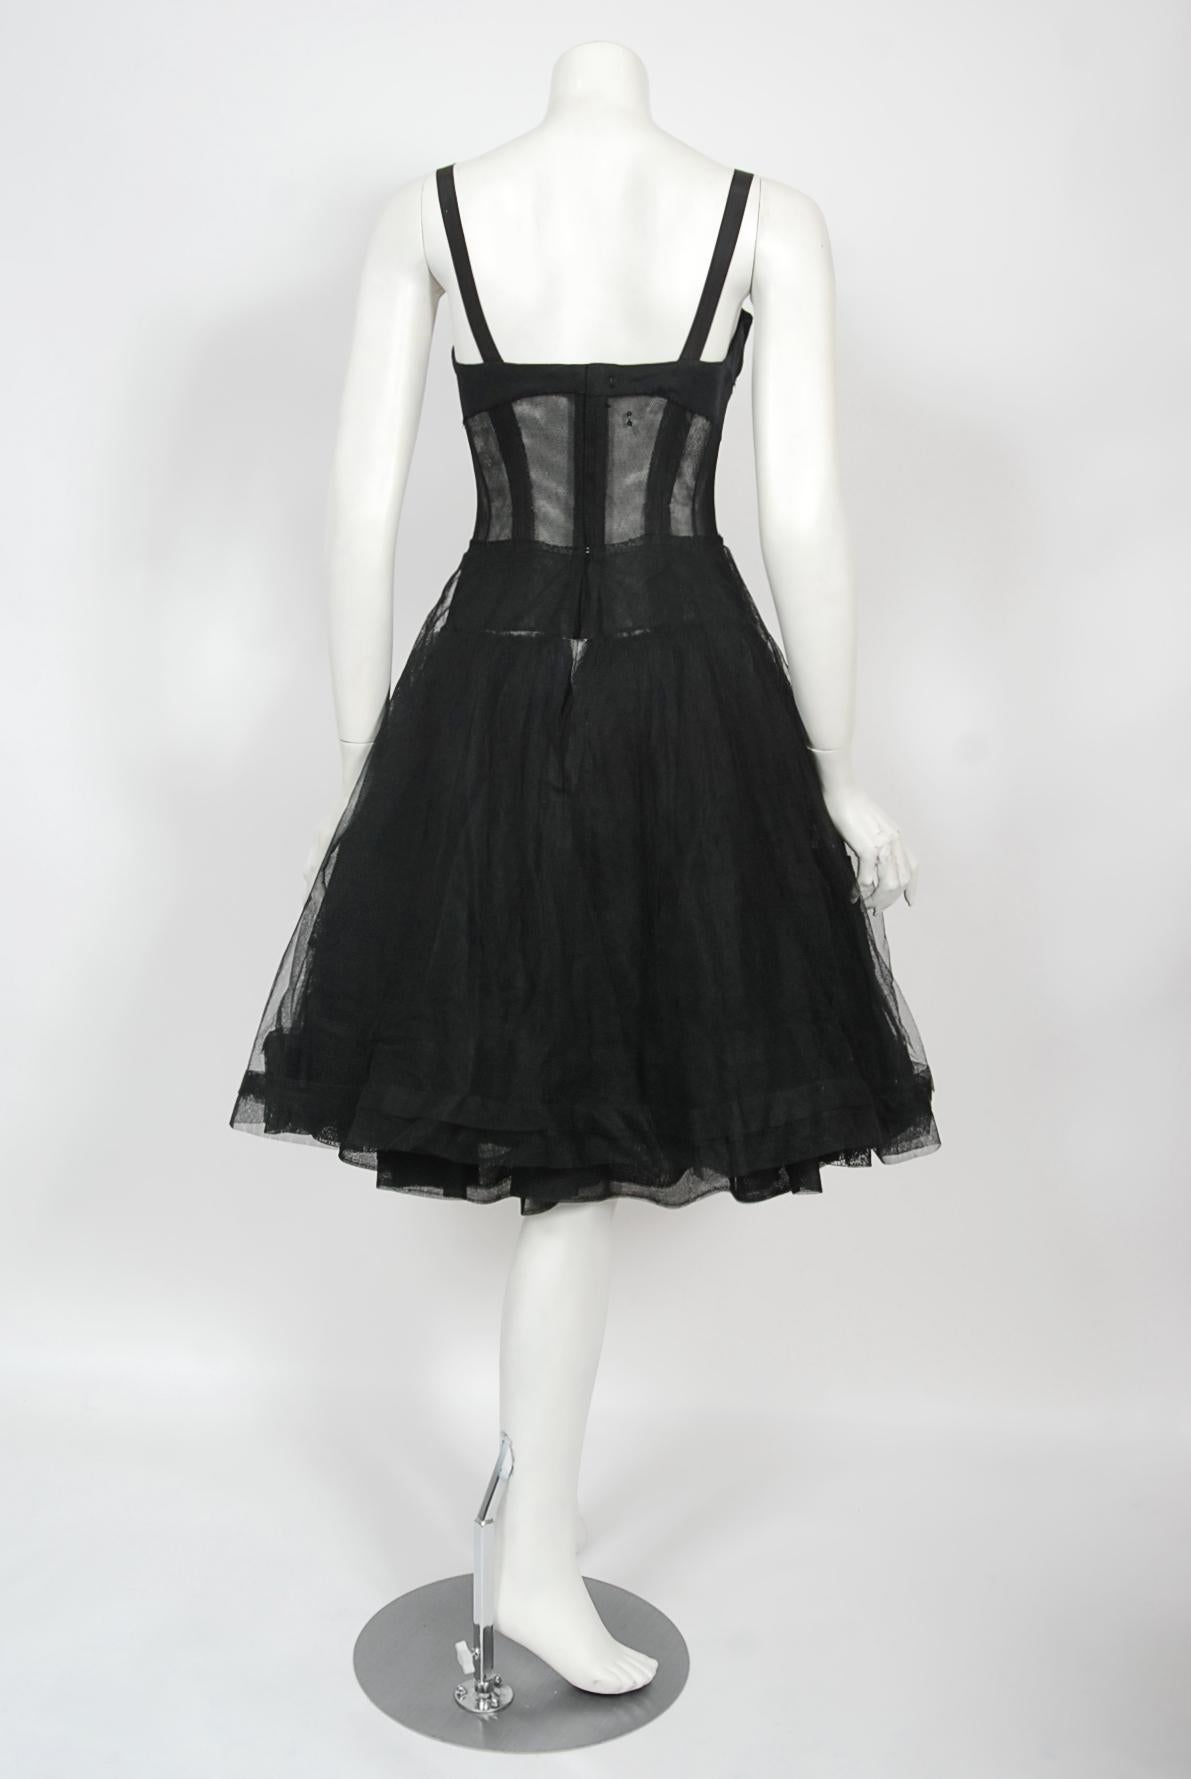 Vintage 1956 Christian Dior Haute Couture Documented Black Silk 'New Look' Dress 8